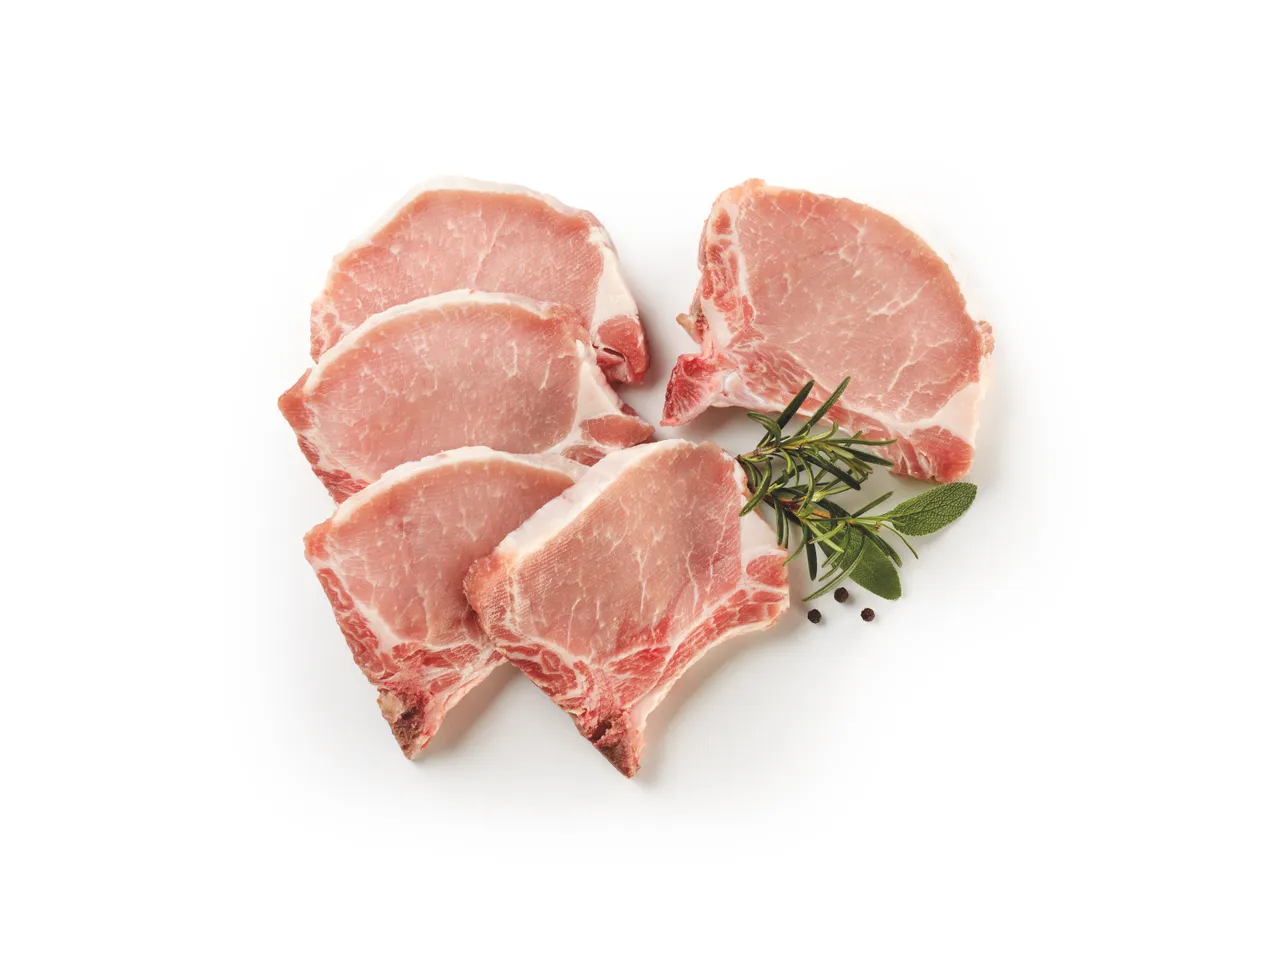 Go to full screen view: Pork Chops - Image 1